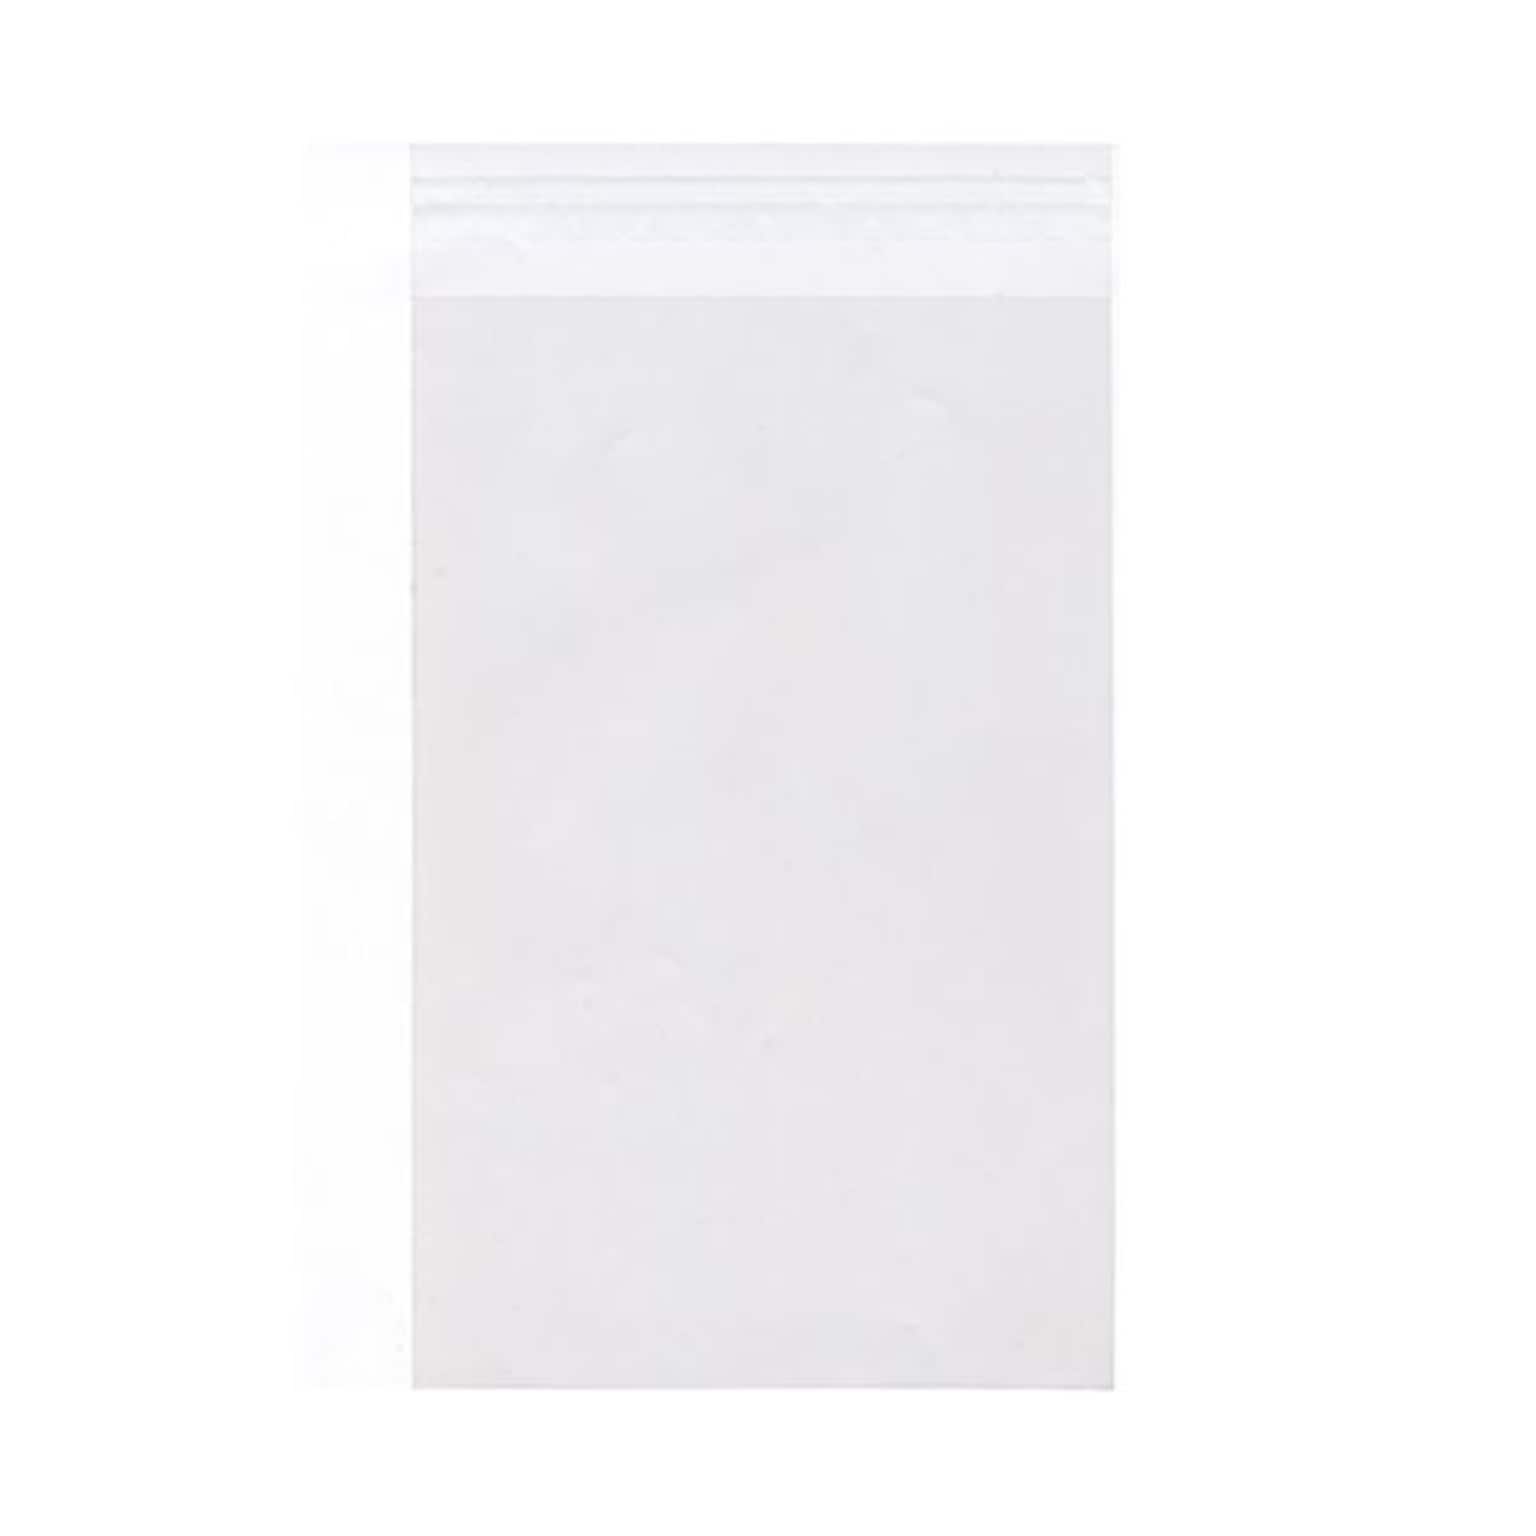 JAM Paper Cello Sleeves with Peel & Seal Closure, 11.25 x 14.25, Clear, 100/Pack (11.514.25CELLO)